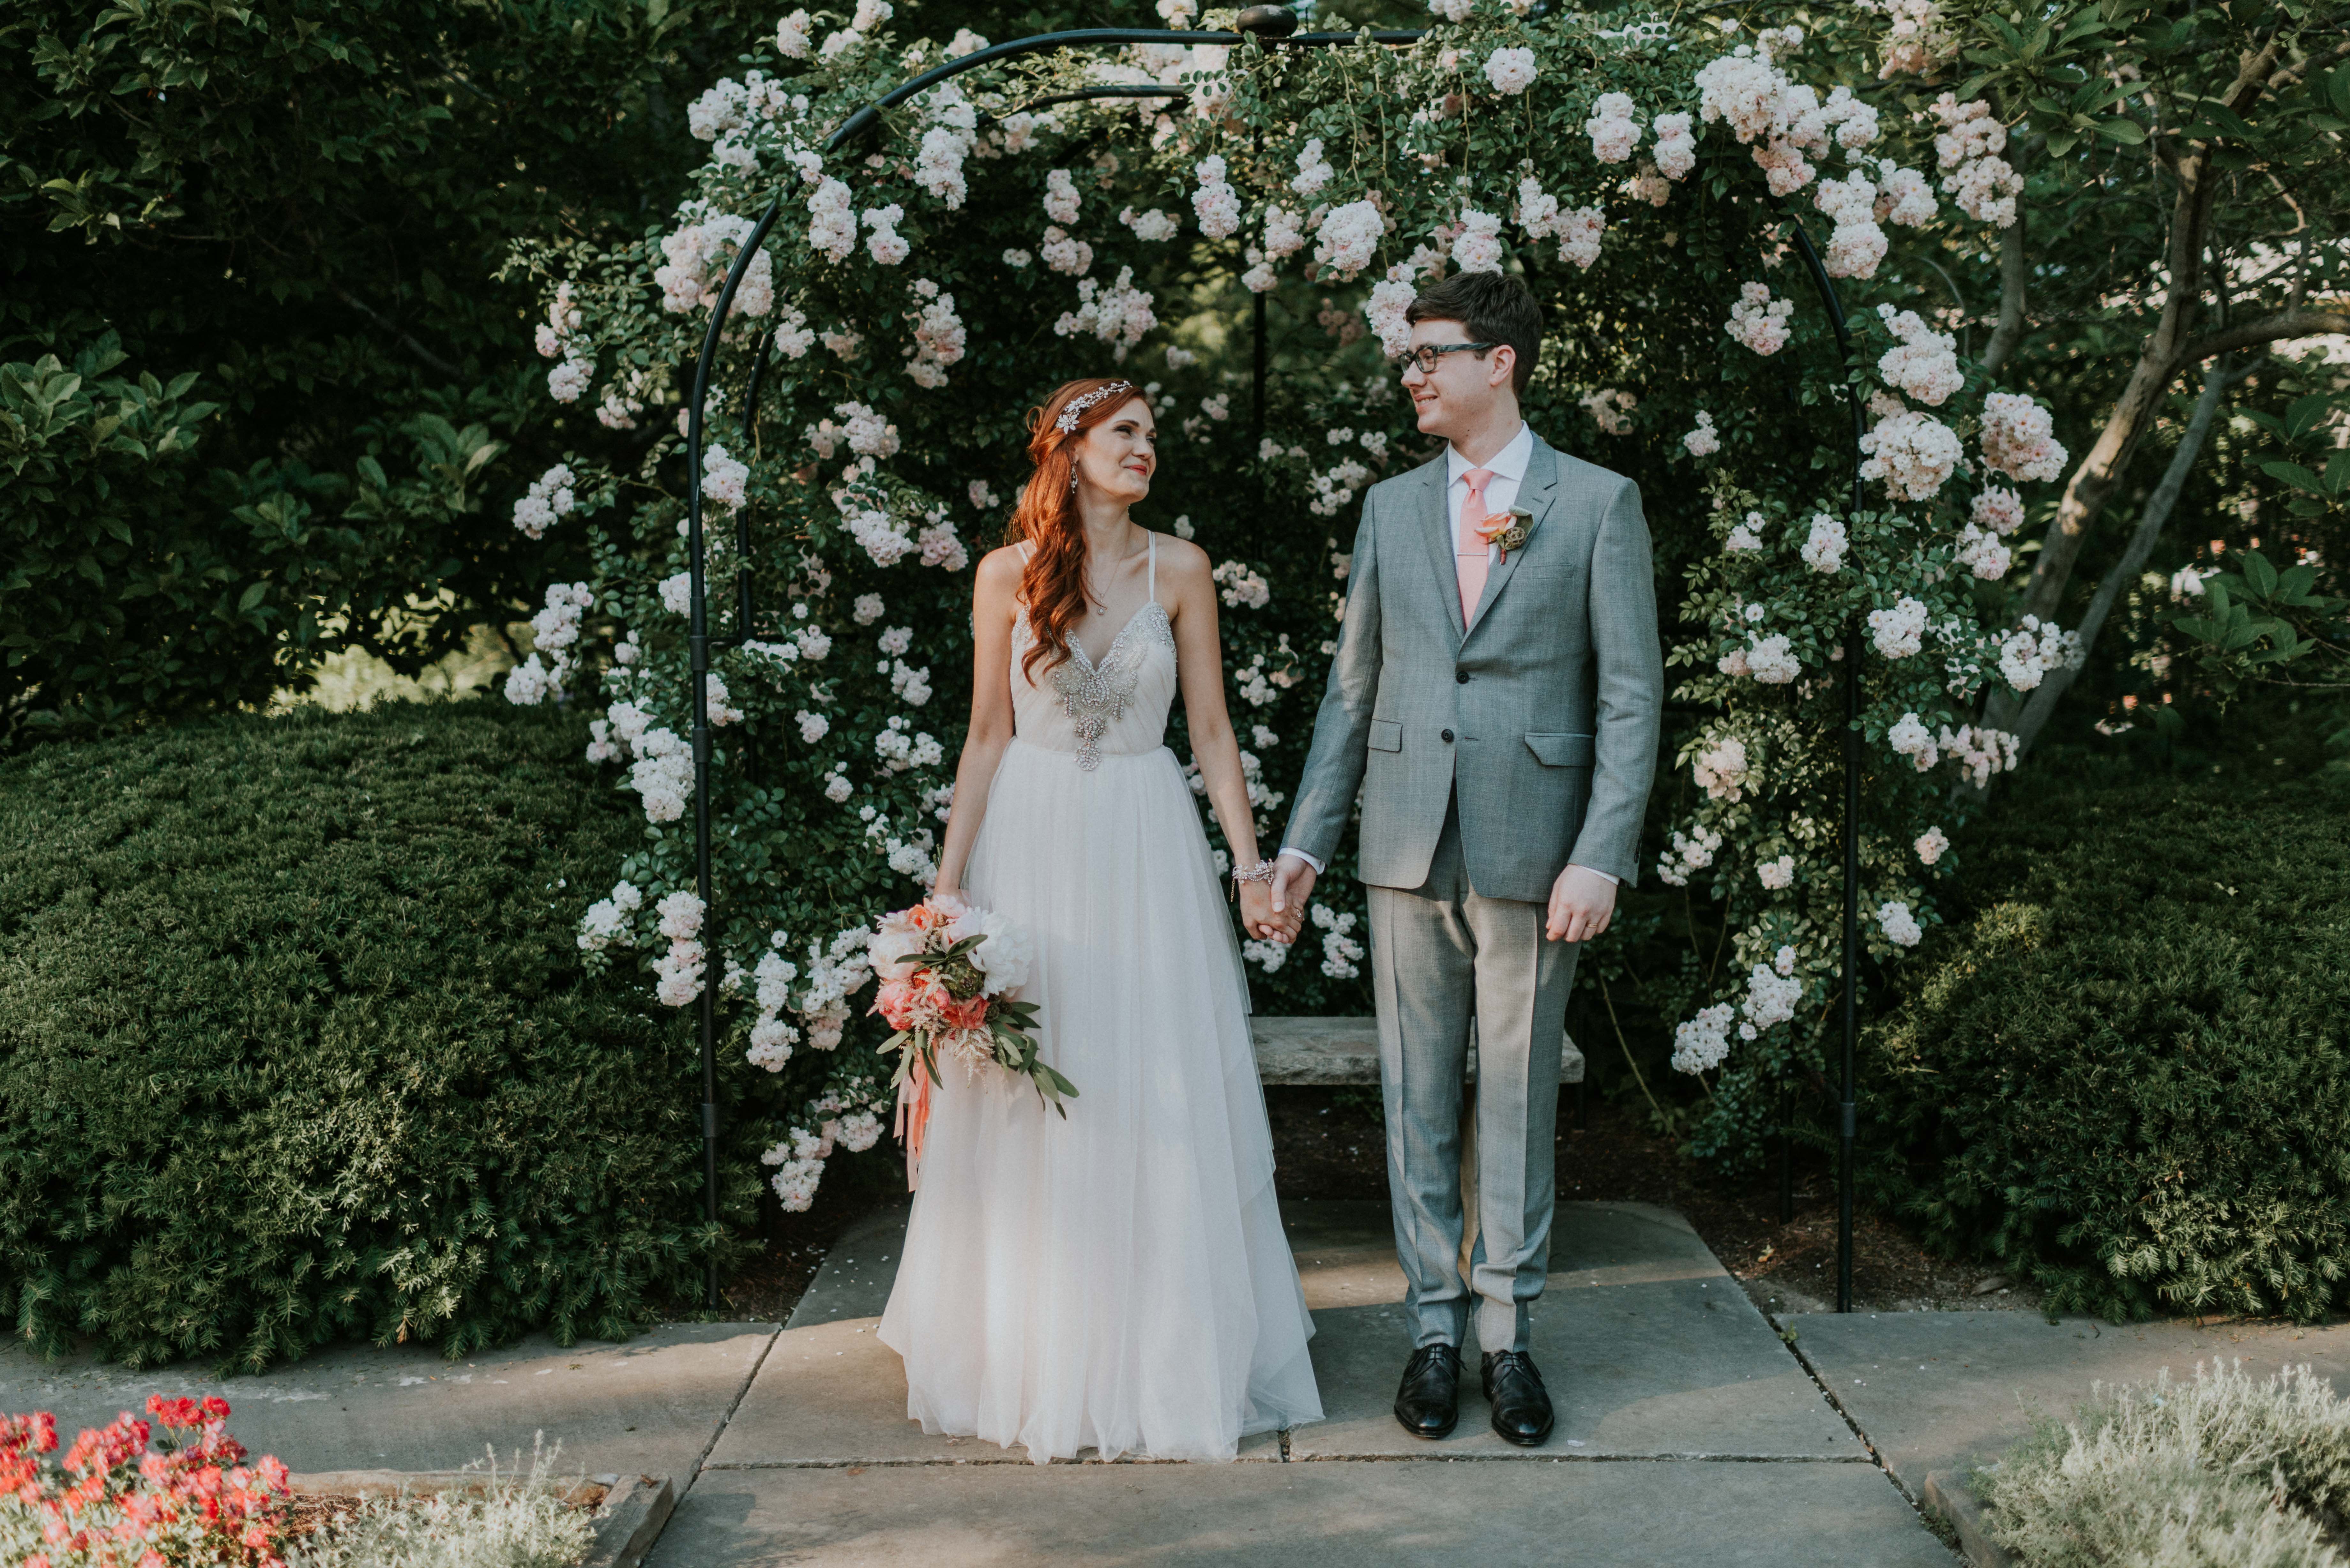 An Enchanted Fairy Tale Wedding At The Cleveland Botanical Garden